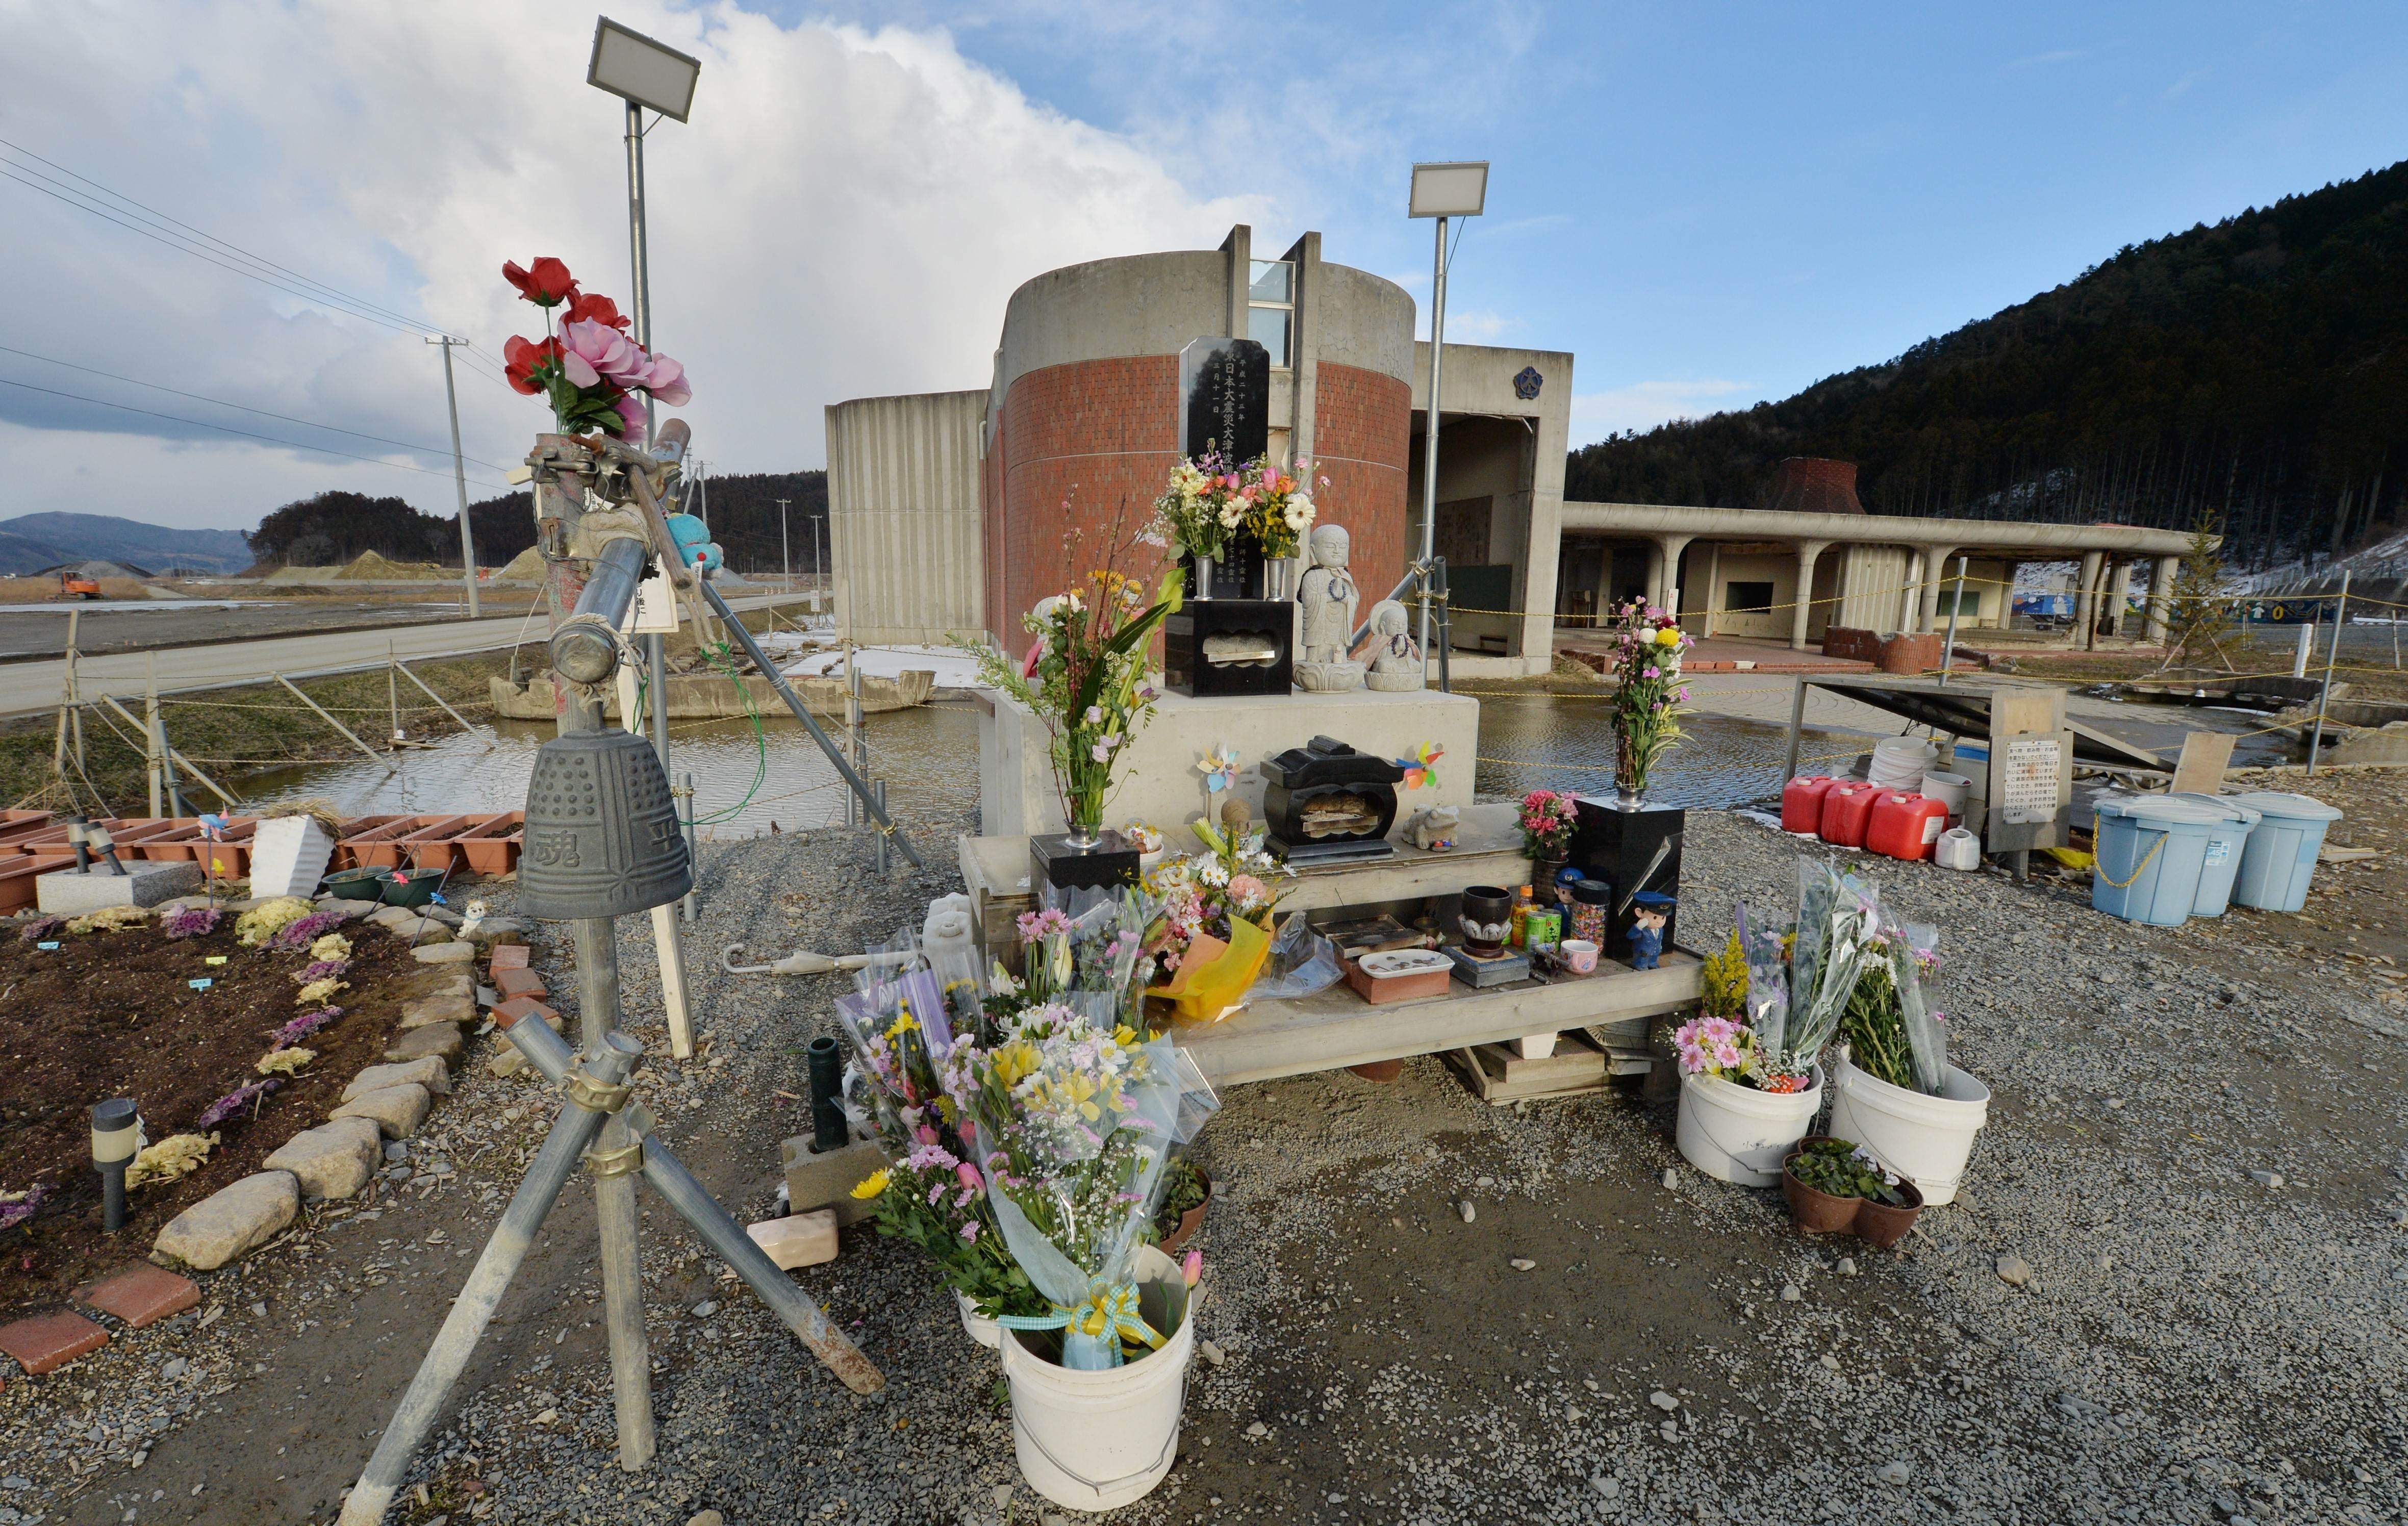 A cenotaph for victims of the 2011 Japan tsunami stands in front of the former Okawa Elementary School in Ishinomaki, Miyagi prefecture, where 74 children and 10 teachers died. Photo: AFP